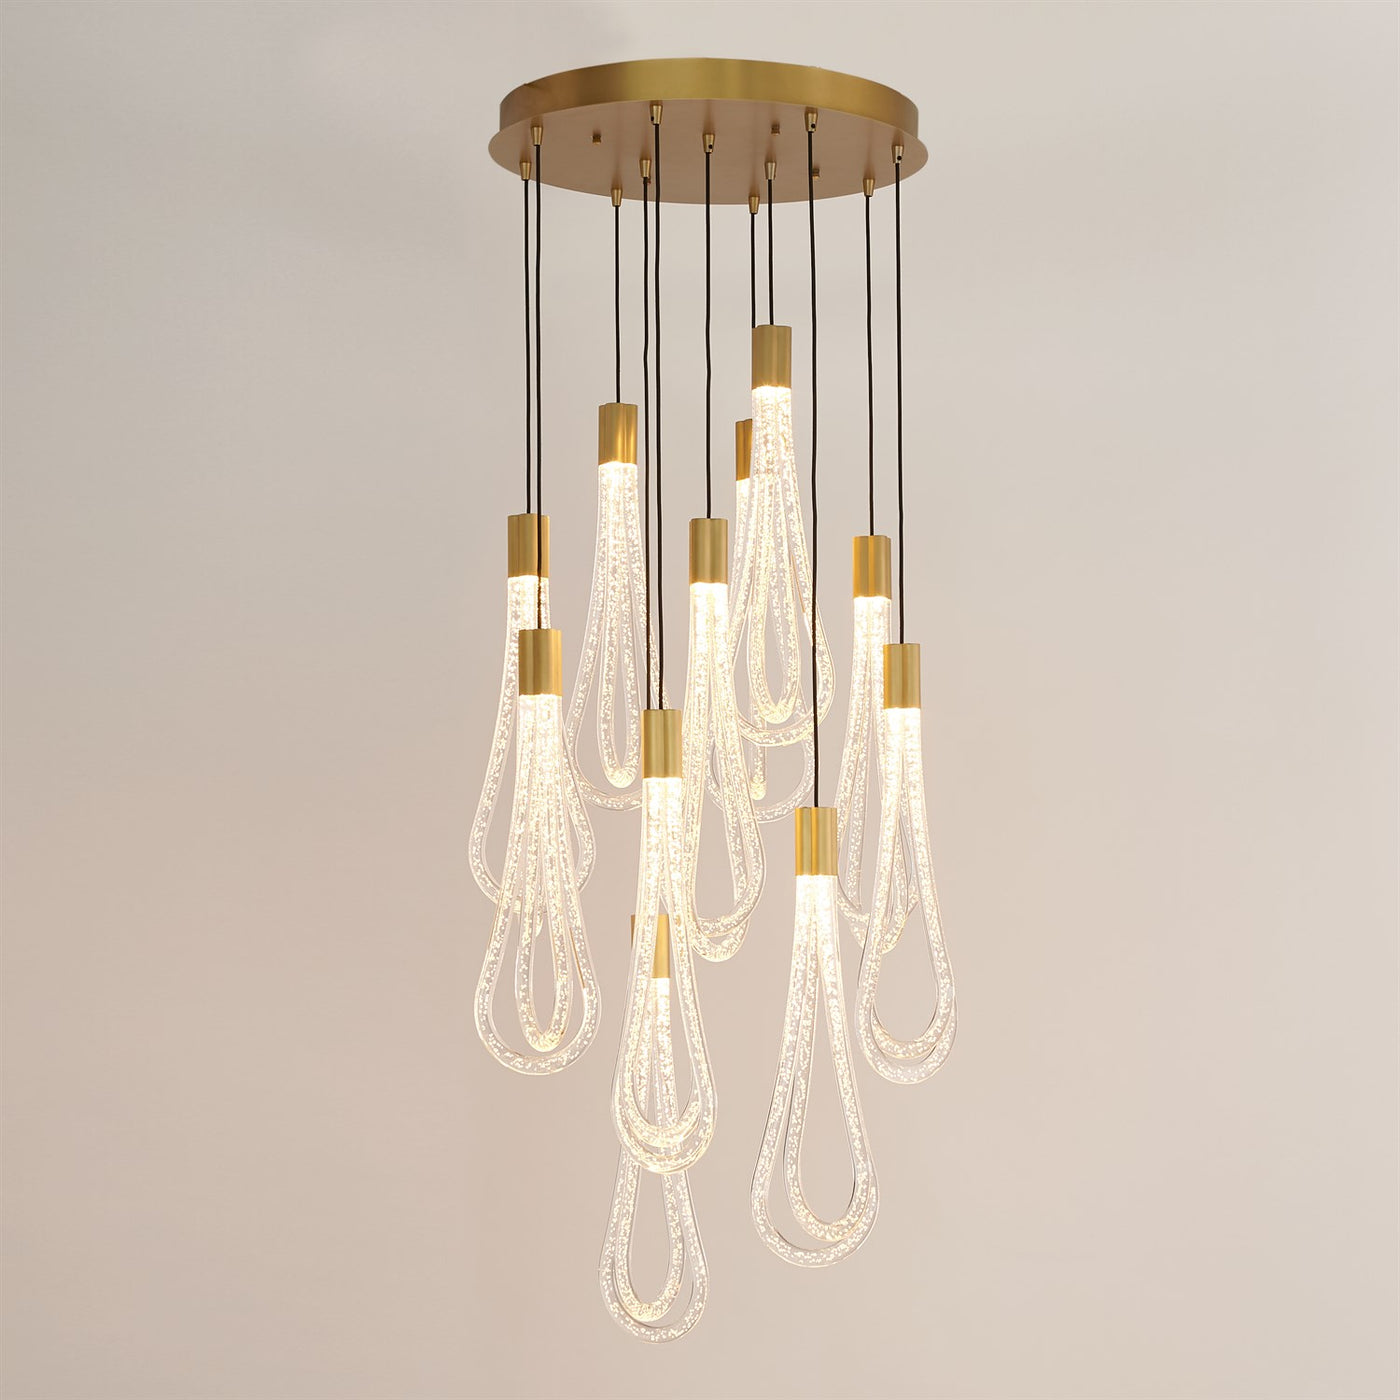 ROUND LAYERED RAINDROP CHANDELIER by Global Views